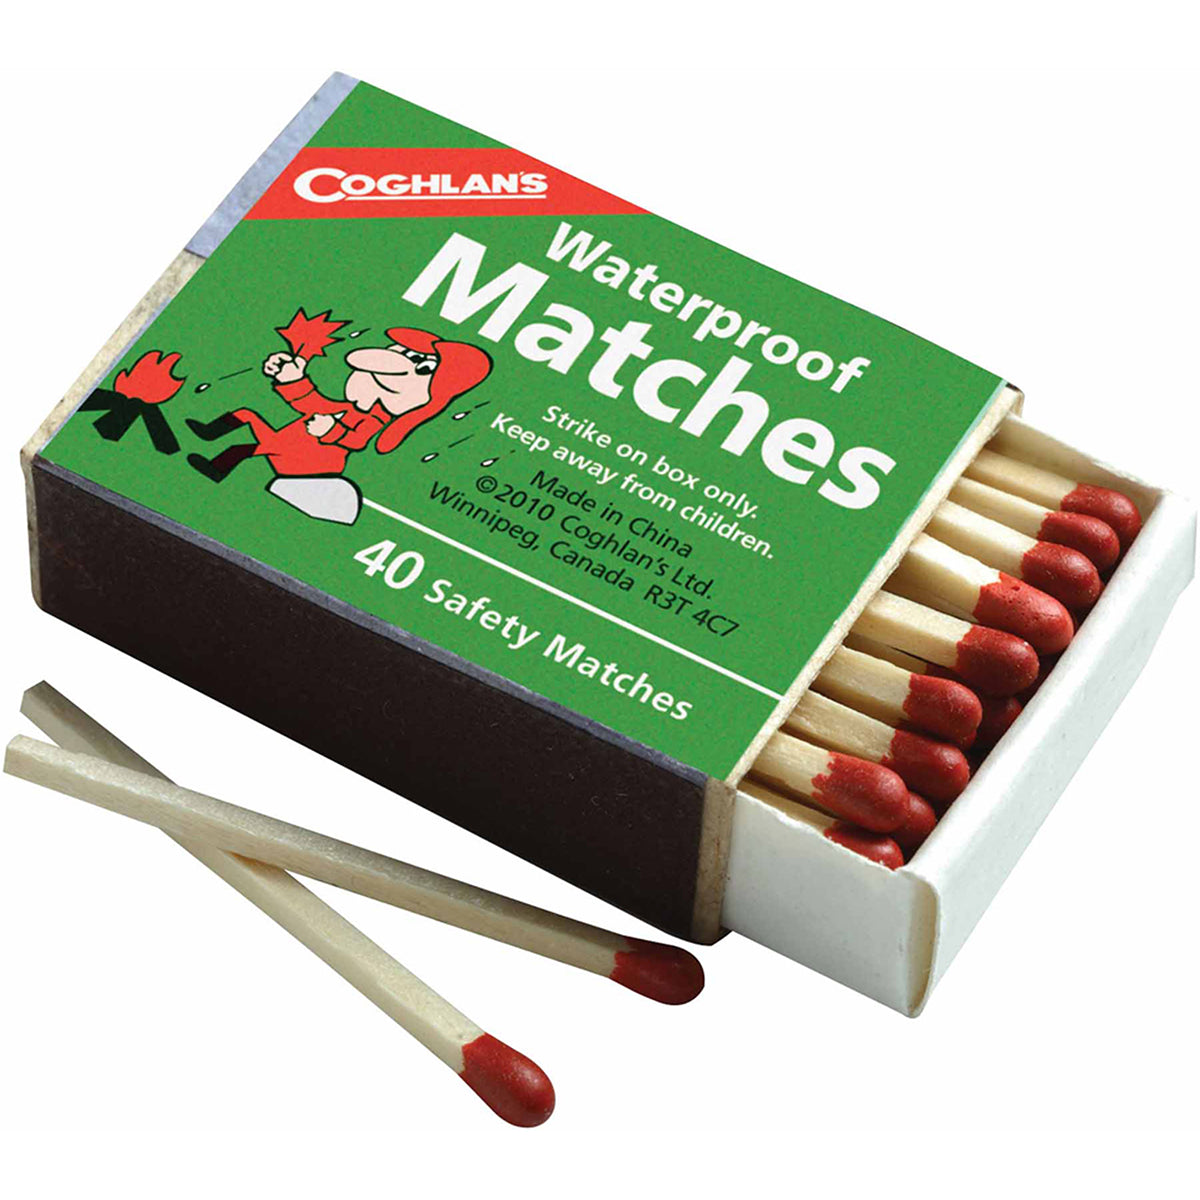 Coghlan's Waterproof Matches (10 Boxes), 400 Total Matches, Safety w/ Striker Coghlan's